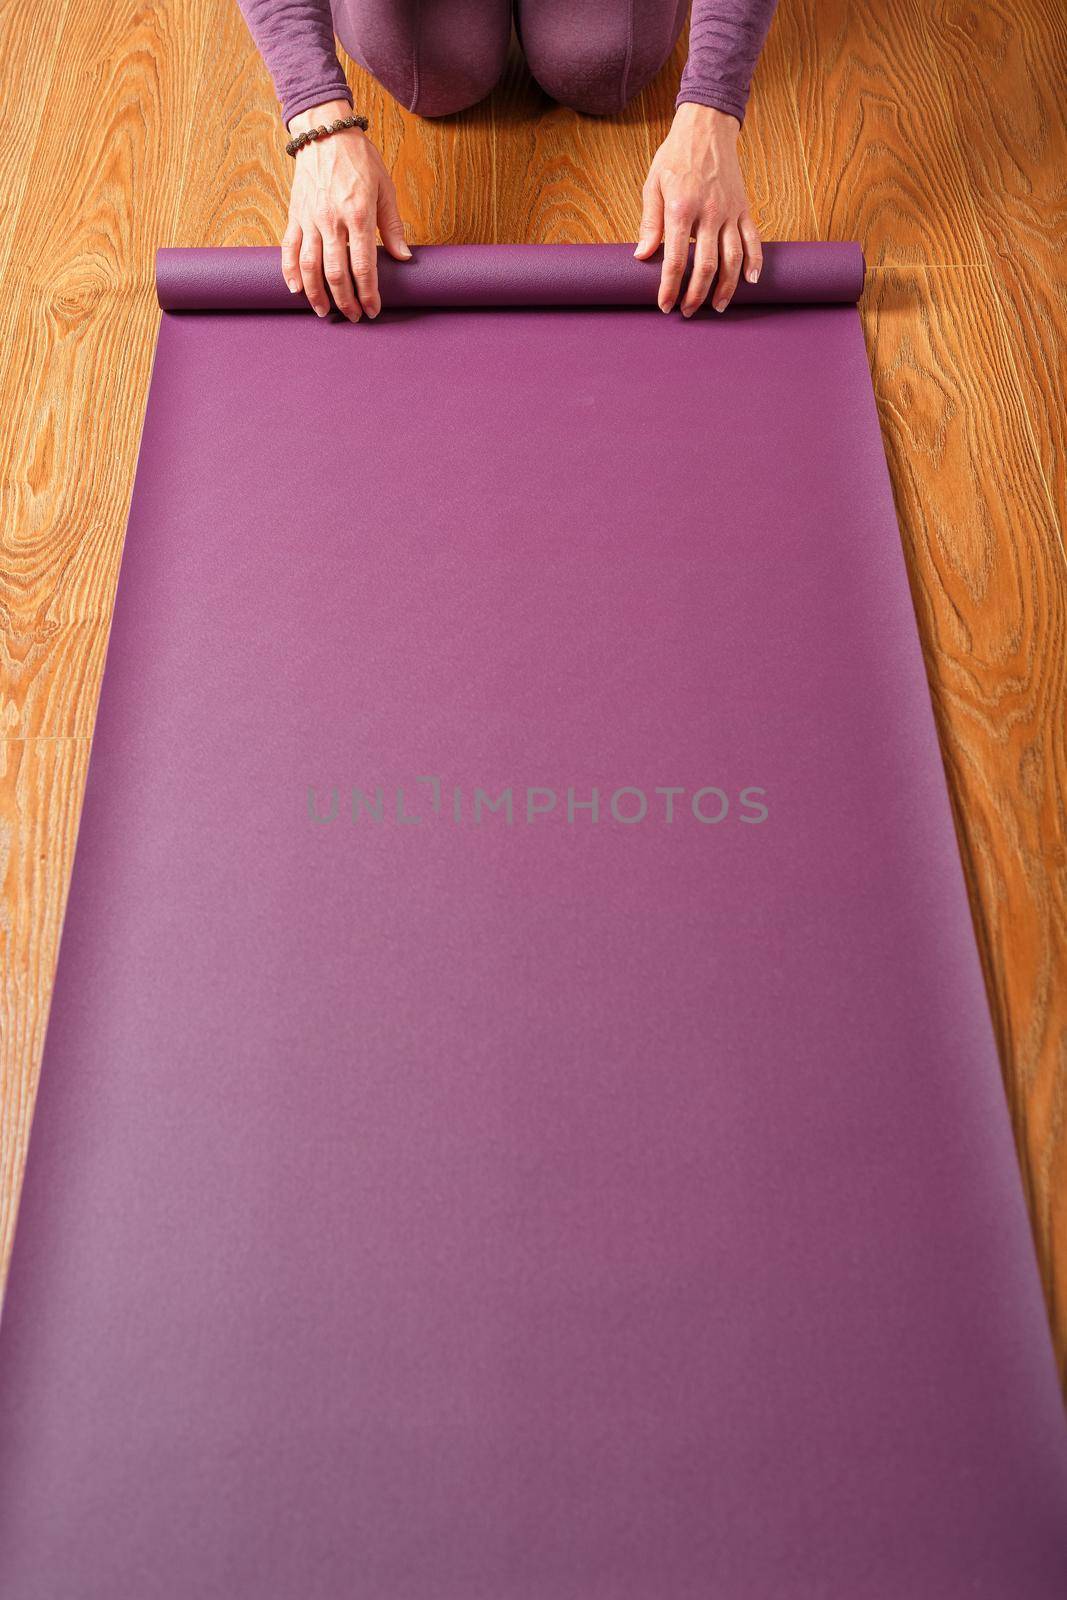 A woman's hands fold a lilac yoga or fitness mat after a workout at home in the living room. Healthy lifestyle, asana and meditation practices